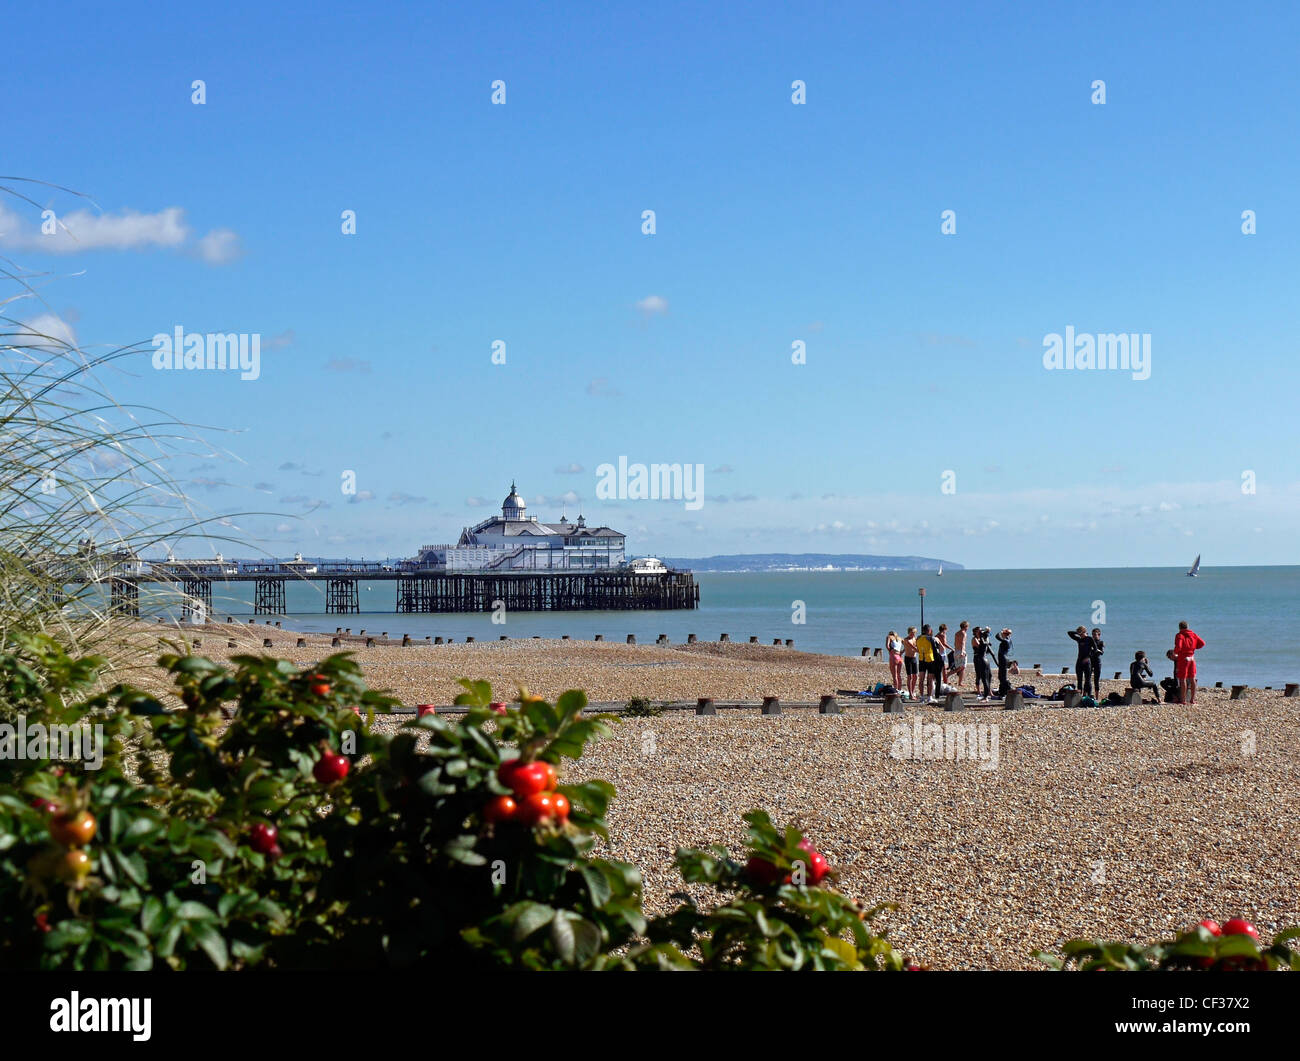 A class preparing for a watersports lesson on the pebble beach at Eastbourne with the pier in the background. Stock Photo